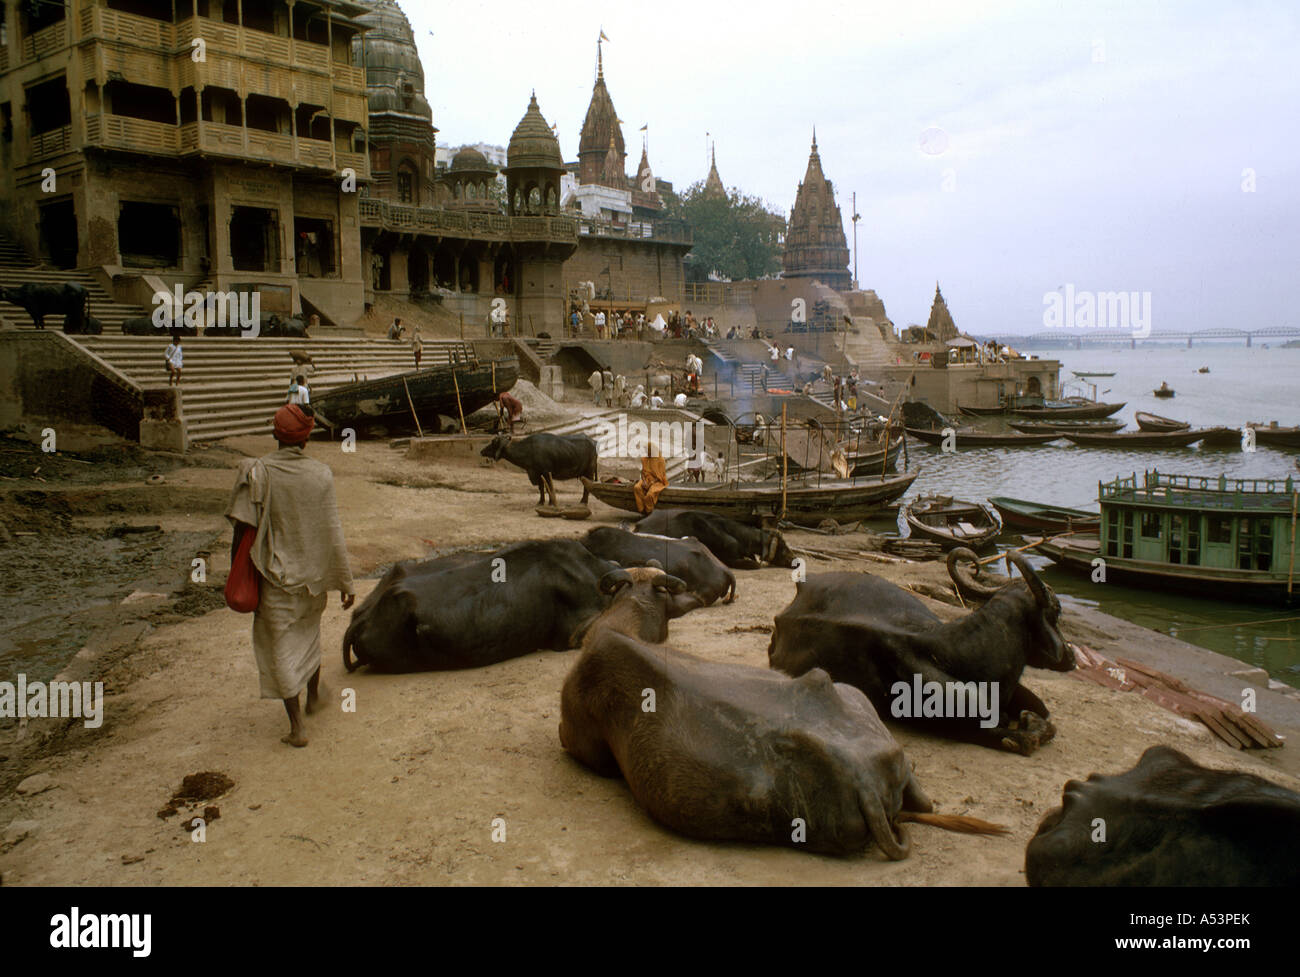 Painet ha1698 3404 india water buffalo burning ghats benares country developing nation economically developed culture Stock Photo